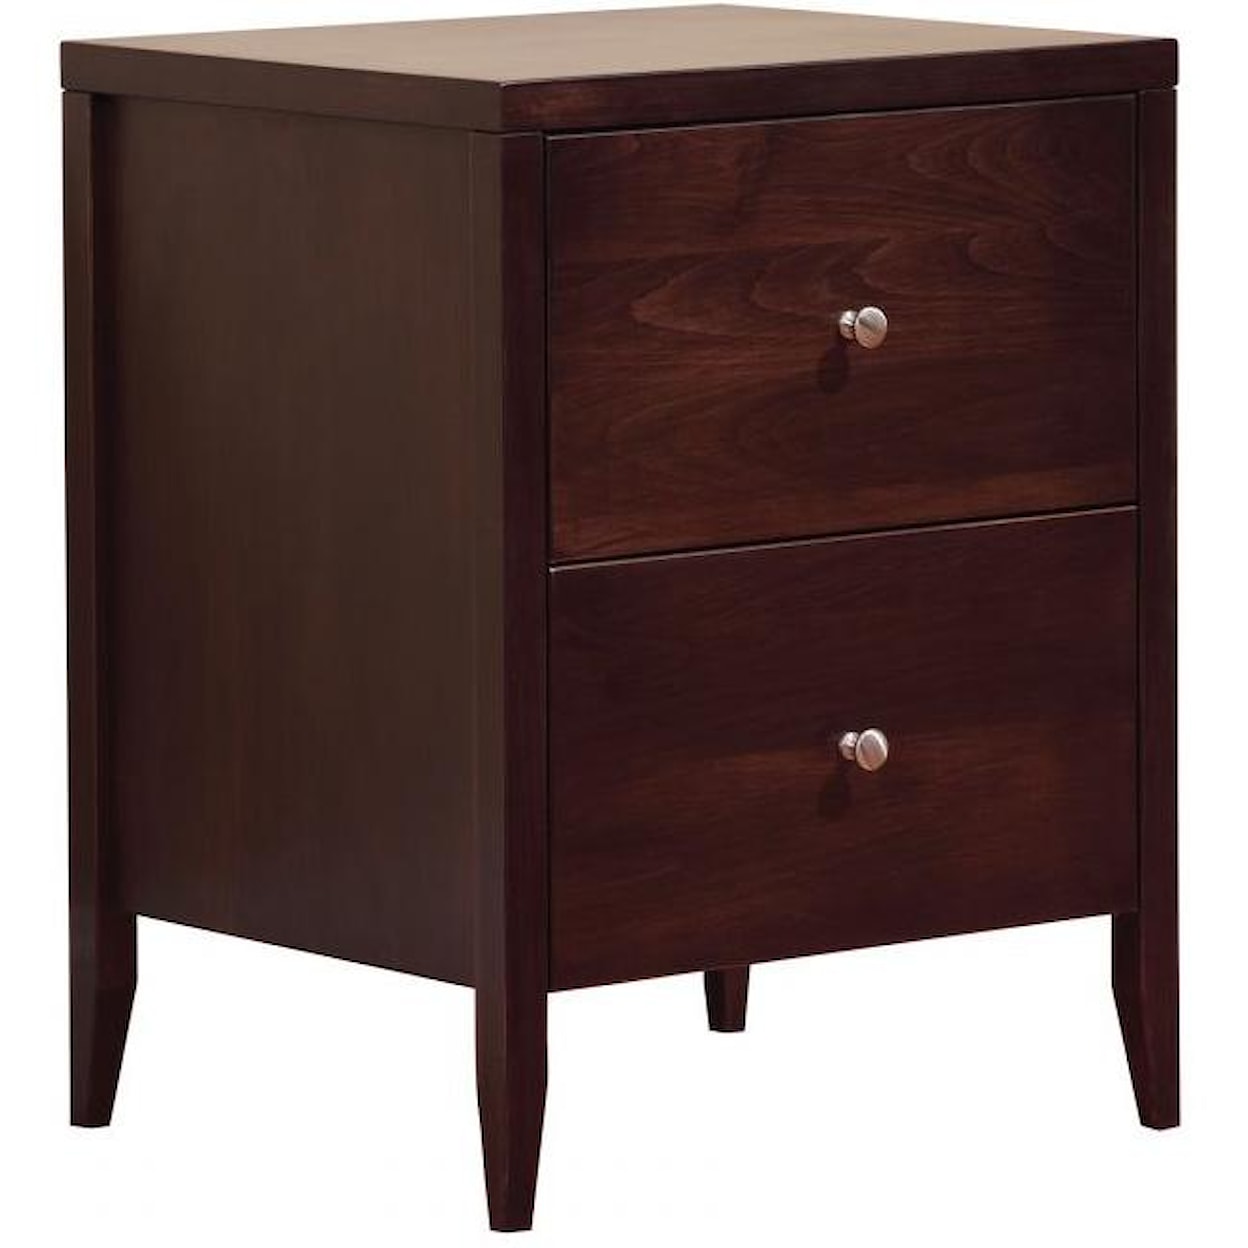 Canal Dover Furniture Renaissance Bedroom 2 Drawer Night Stand